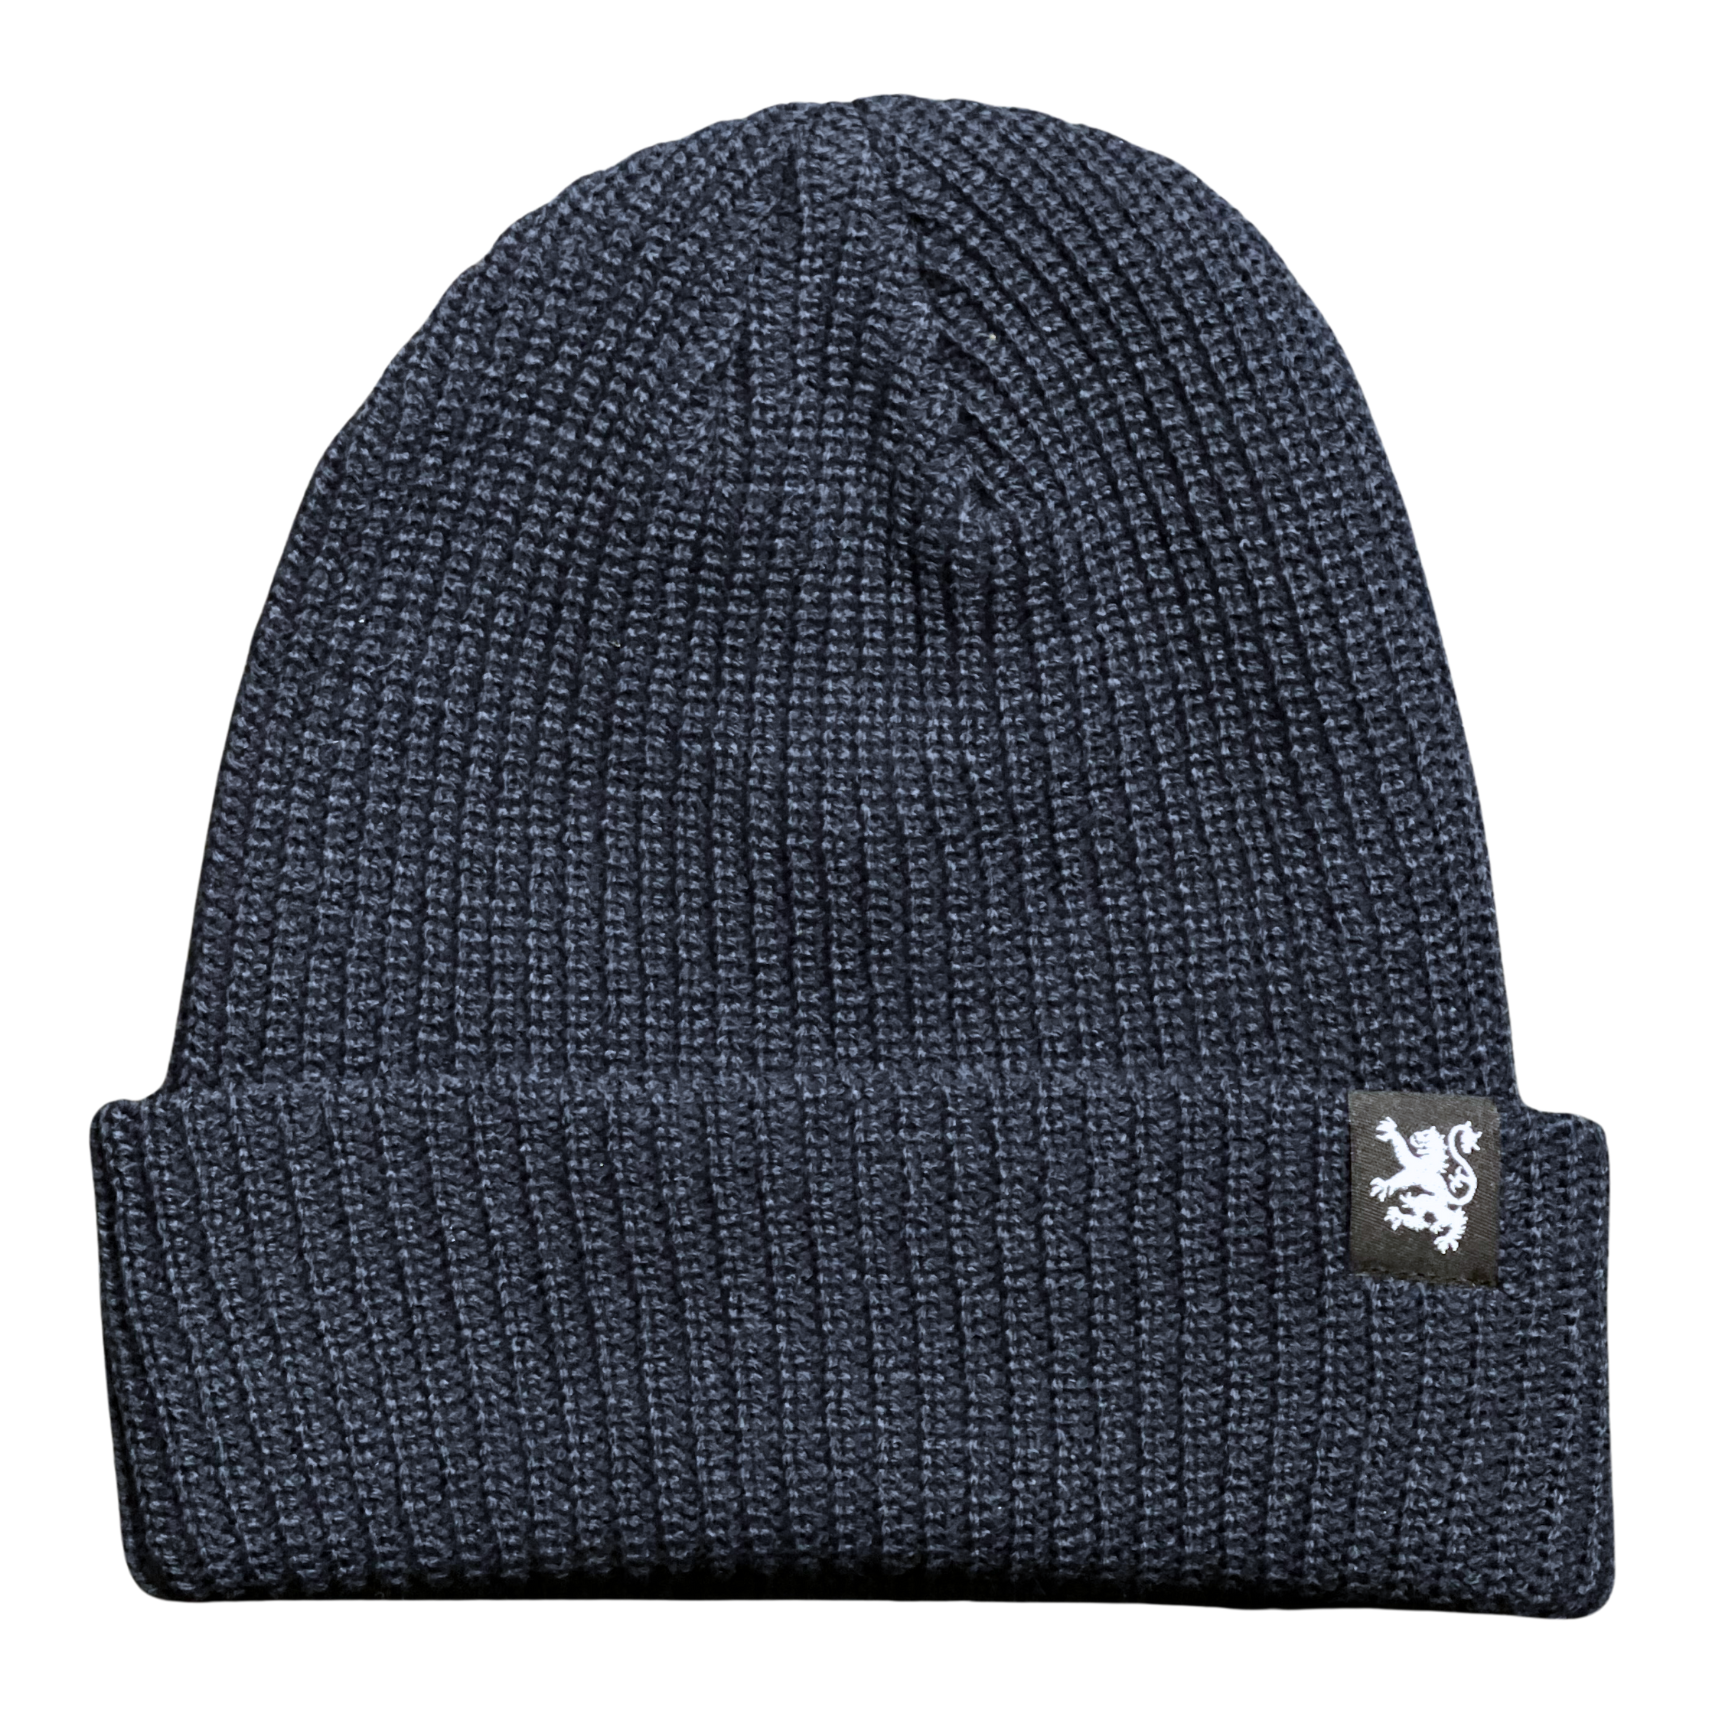 New Scotland Clothing Co. Premium Waffle Knit Toque in Navy